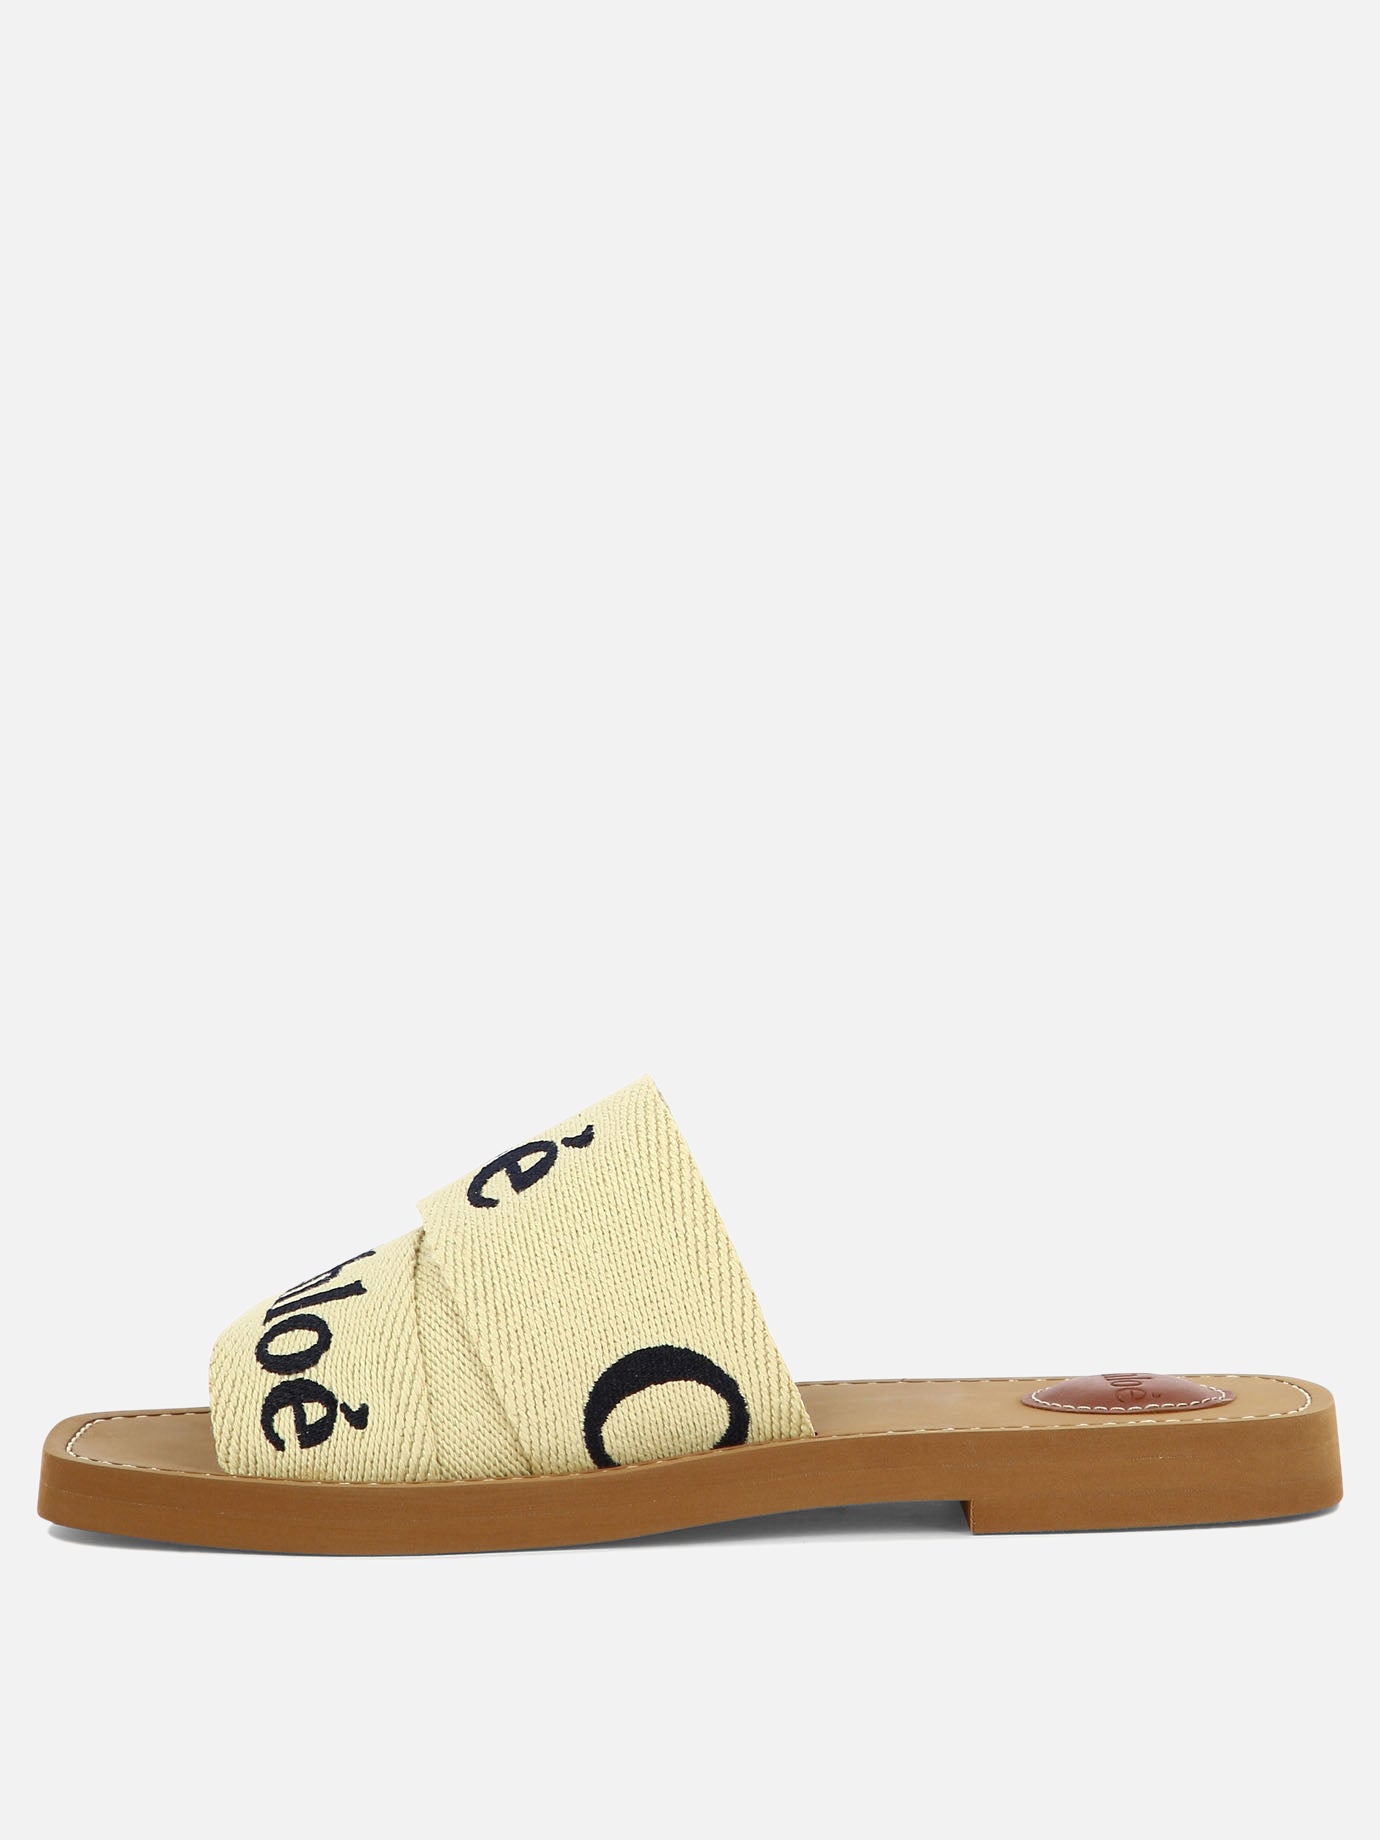 "Woody" sandals